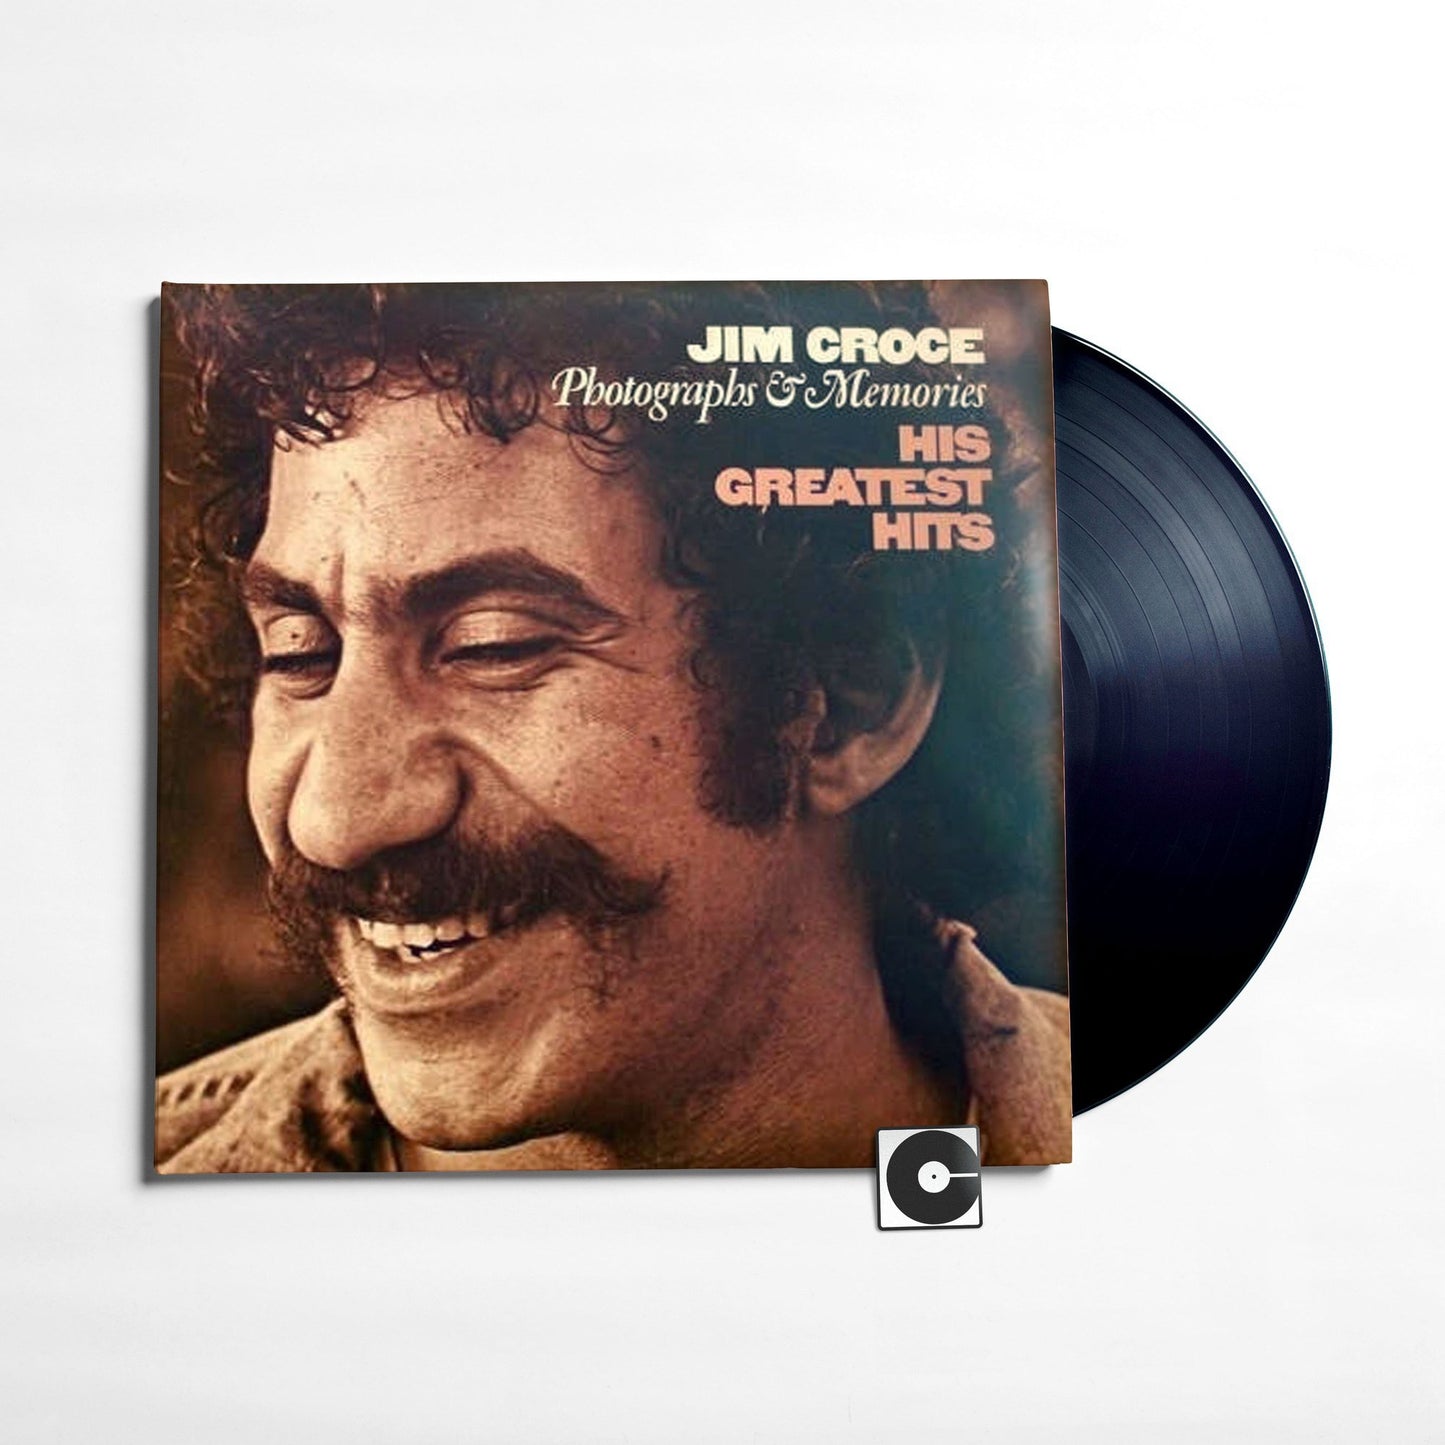 Jim Croce - "Photographs And Memories: His Greatest Hits"